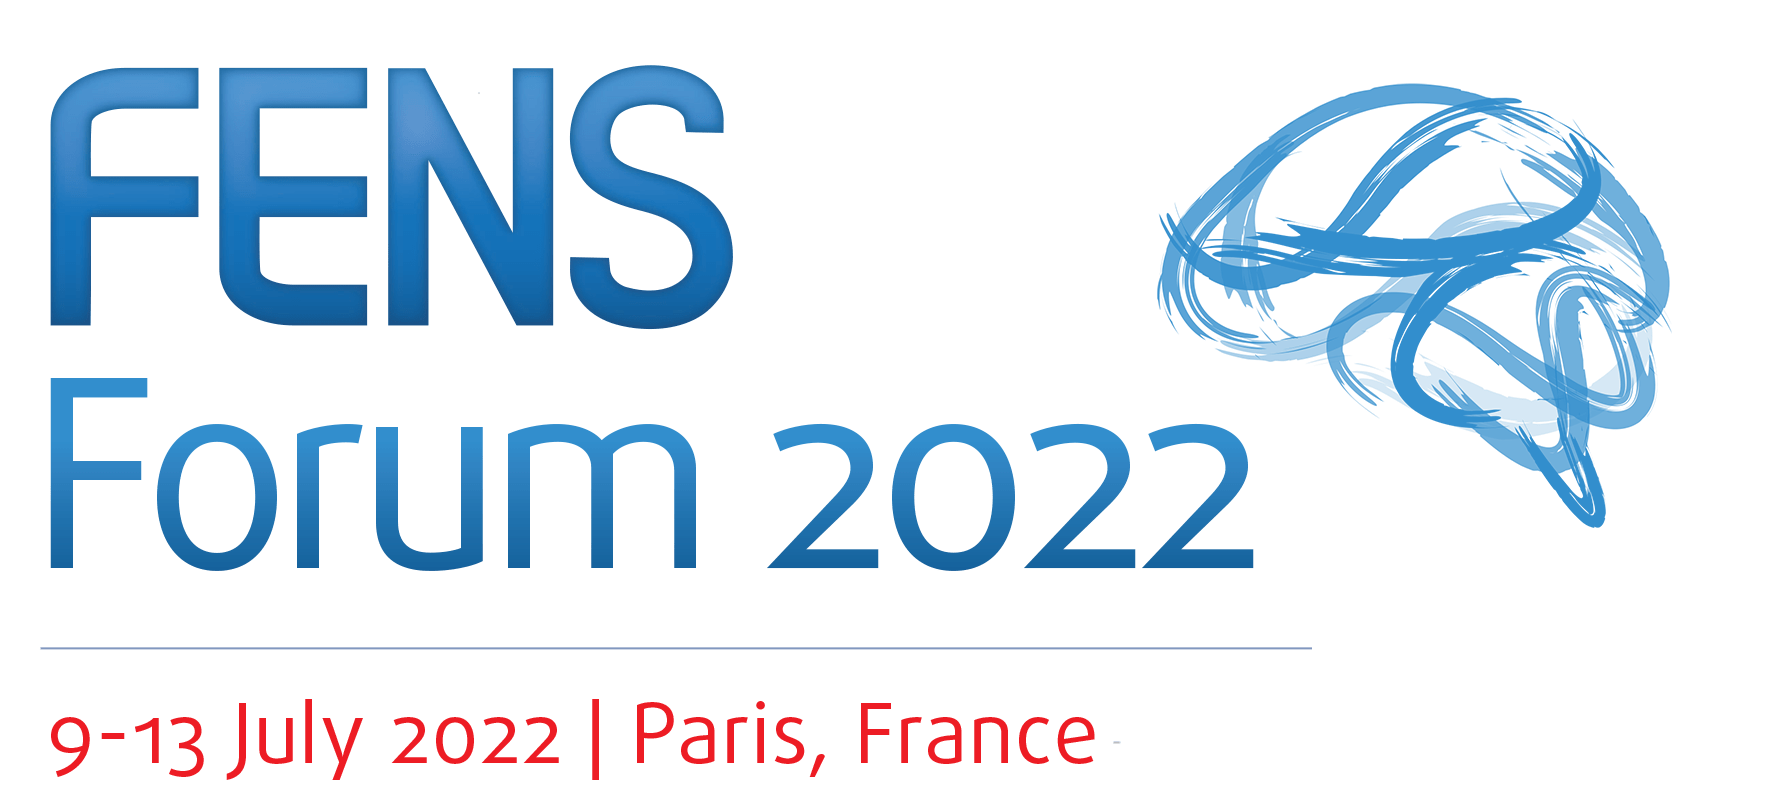 SiE19 - Mentoring during the COVID-19 pandemic and beyond (18:45-20:30) - FENS 2022 - International Neuroscience Conference